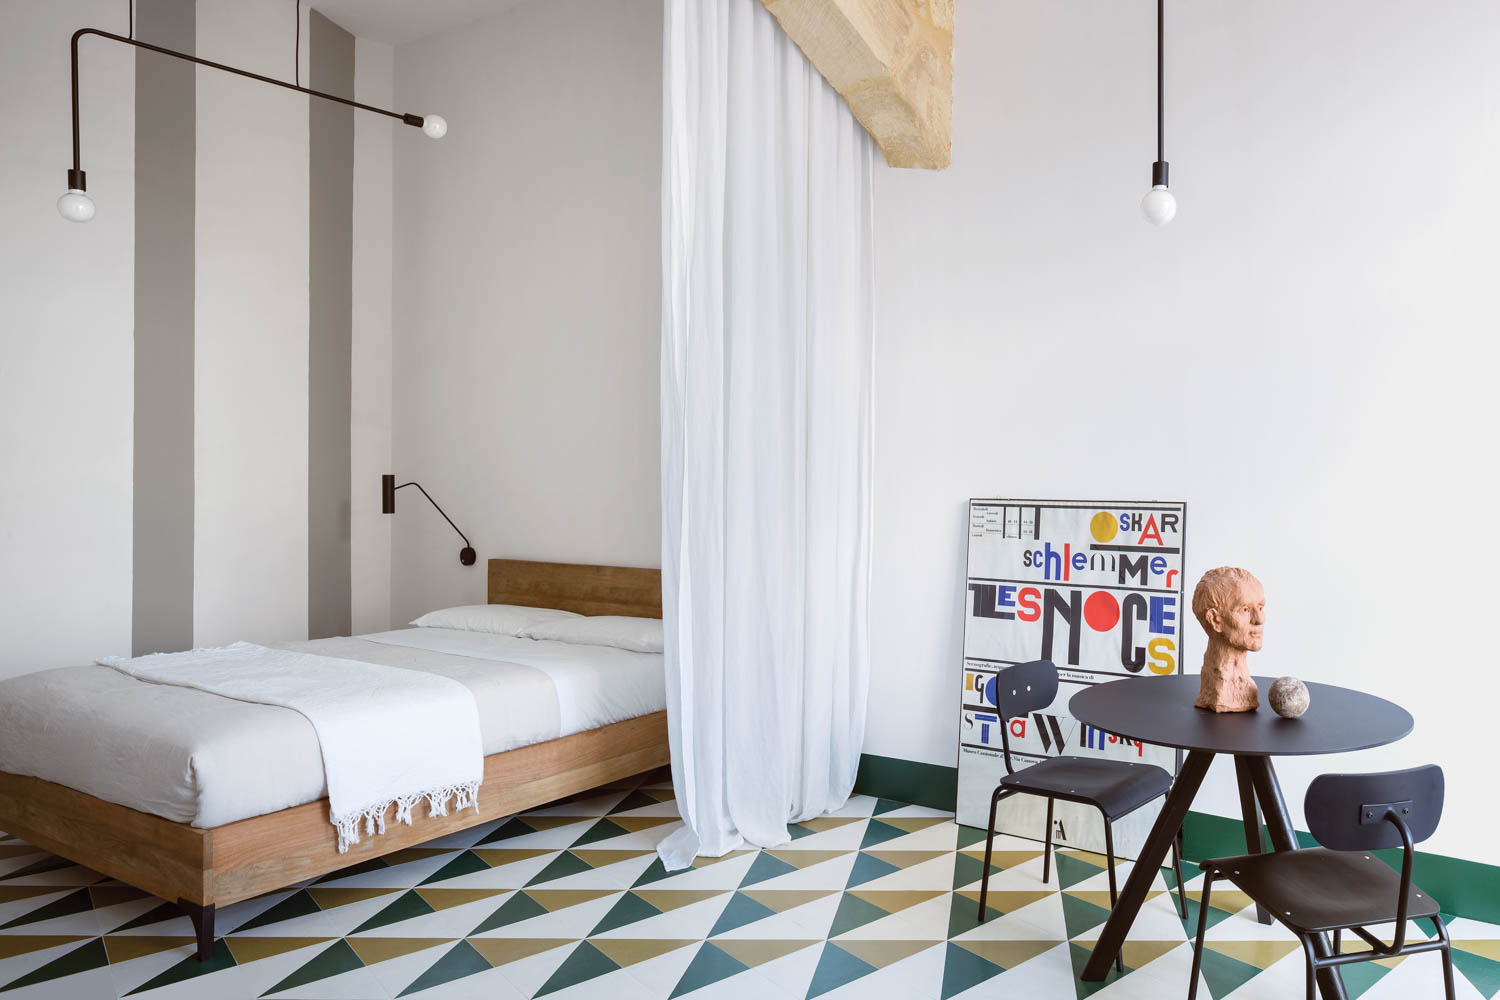 a bed is partitioned off with a sliding curtain atop a green and yellow graphic tile